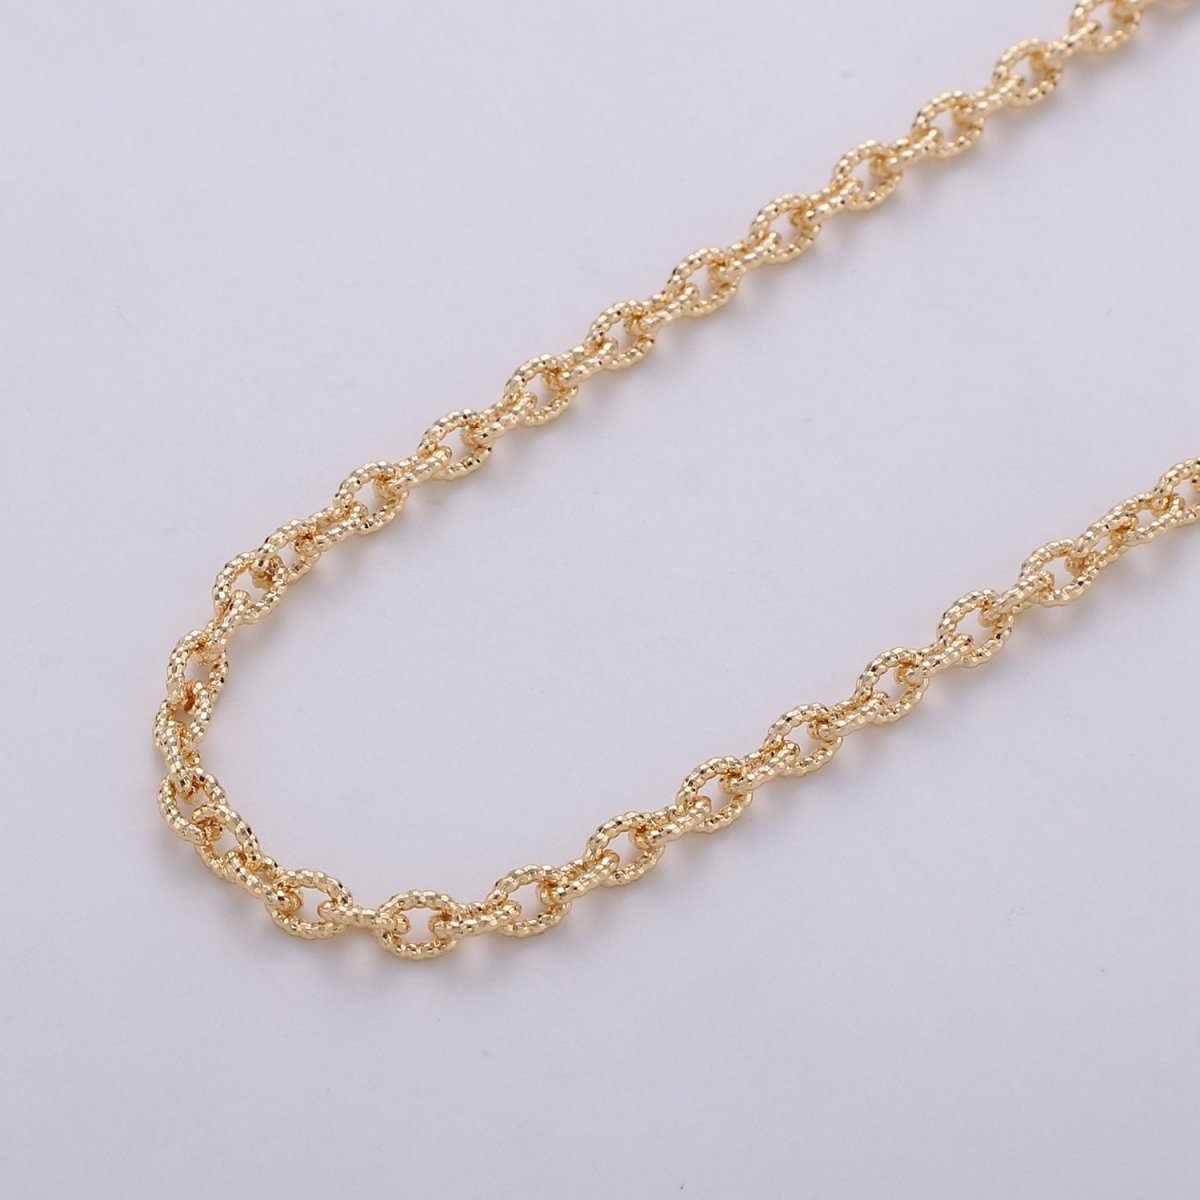 16K Gold Filled Chain, Textured Cable Unique Rolo Chain, 4X3mm Unfinished Chain by Yard | ROLL-269 ROLL-271 Clearance Pricing - DLUXCA